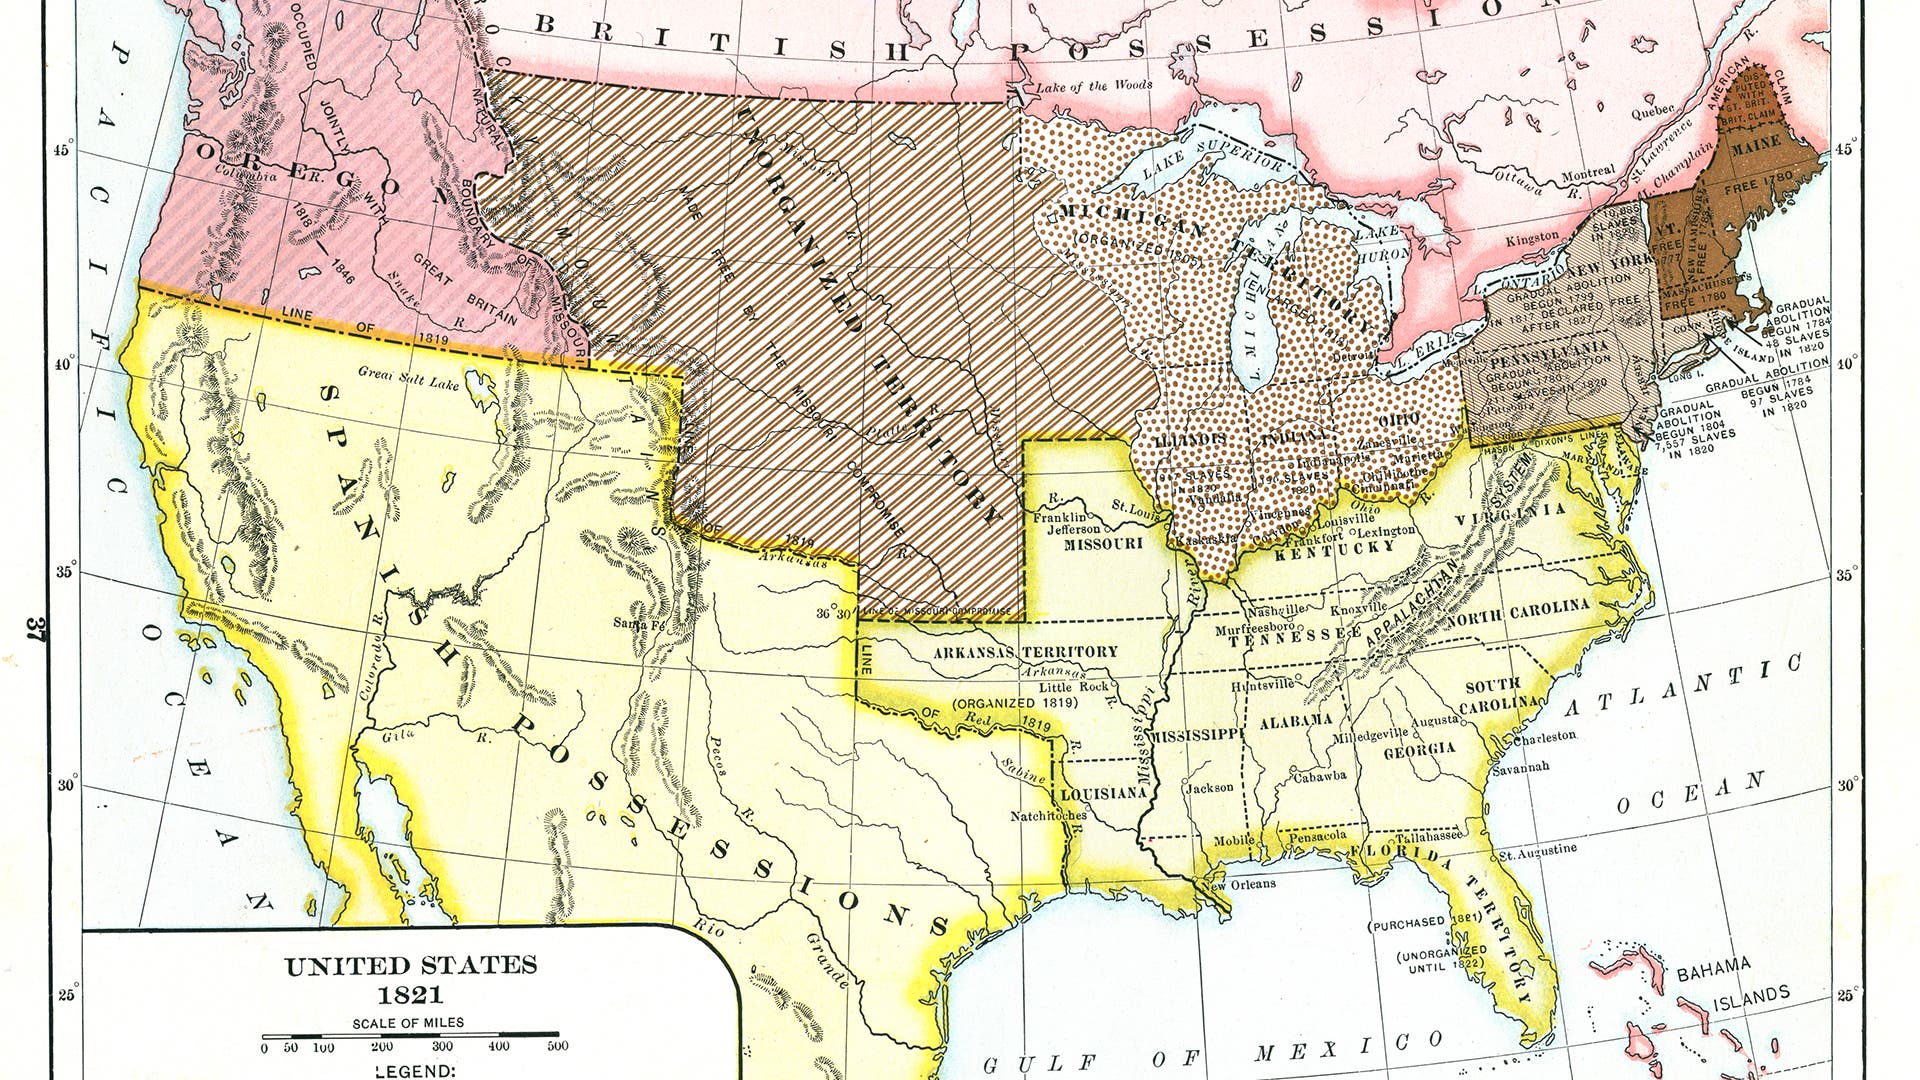 Map illustrates the status of slavery in the United States in 1821. Published in 1920, it shows Free States (brown), states undergoing gradual abolition (light brown), free states via the Ordinance of 1787 (dotted), free states via the Missouri Compromise (striped), and slave-holding states (yellow).